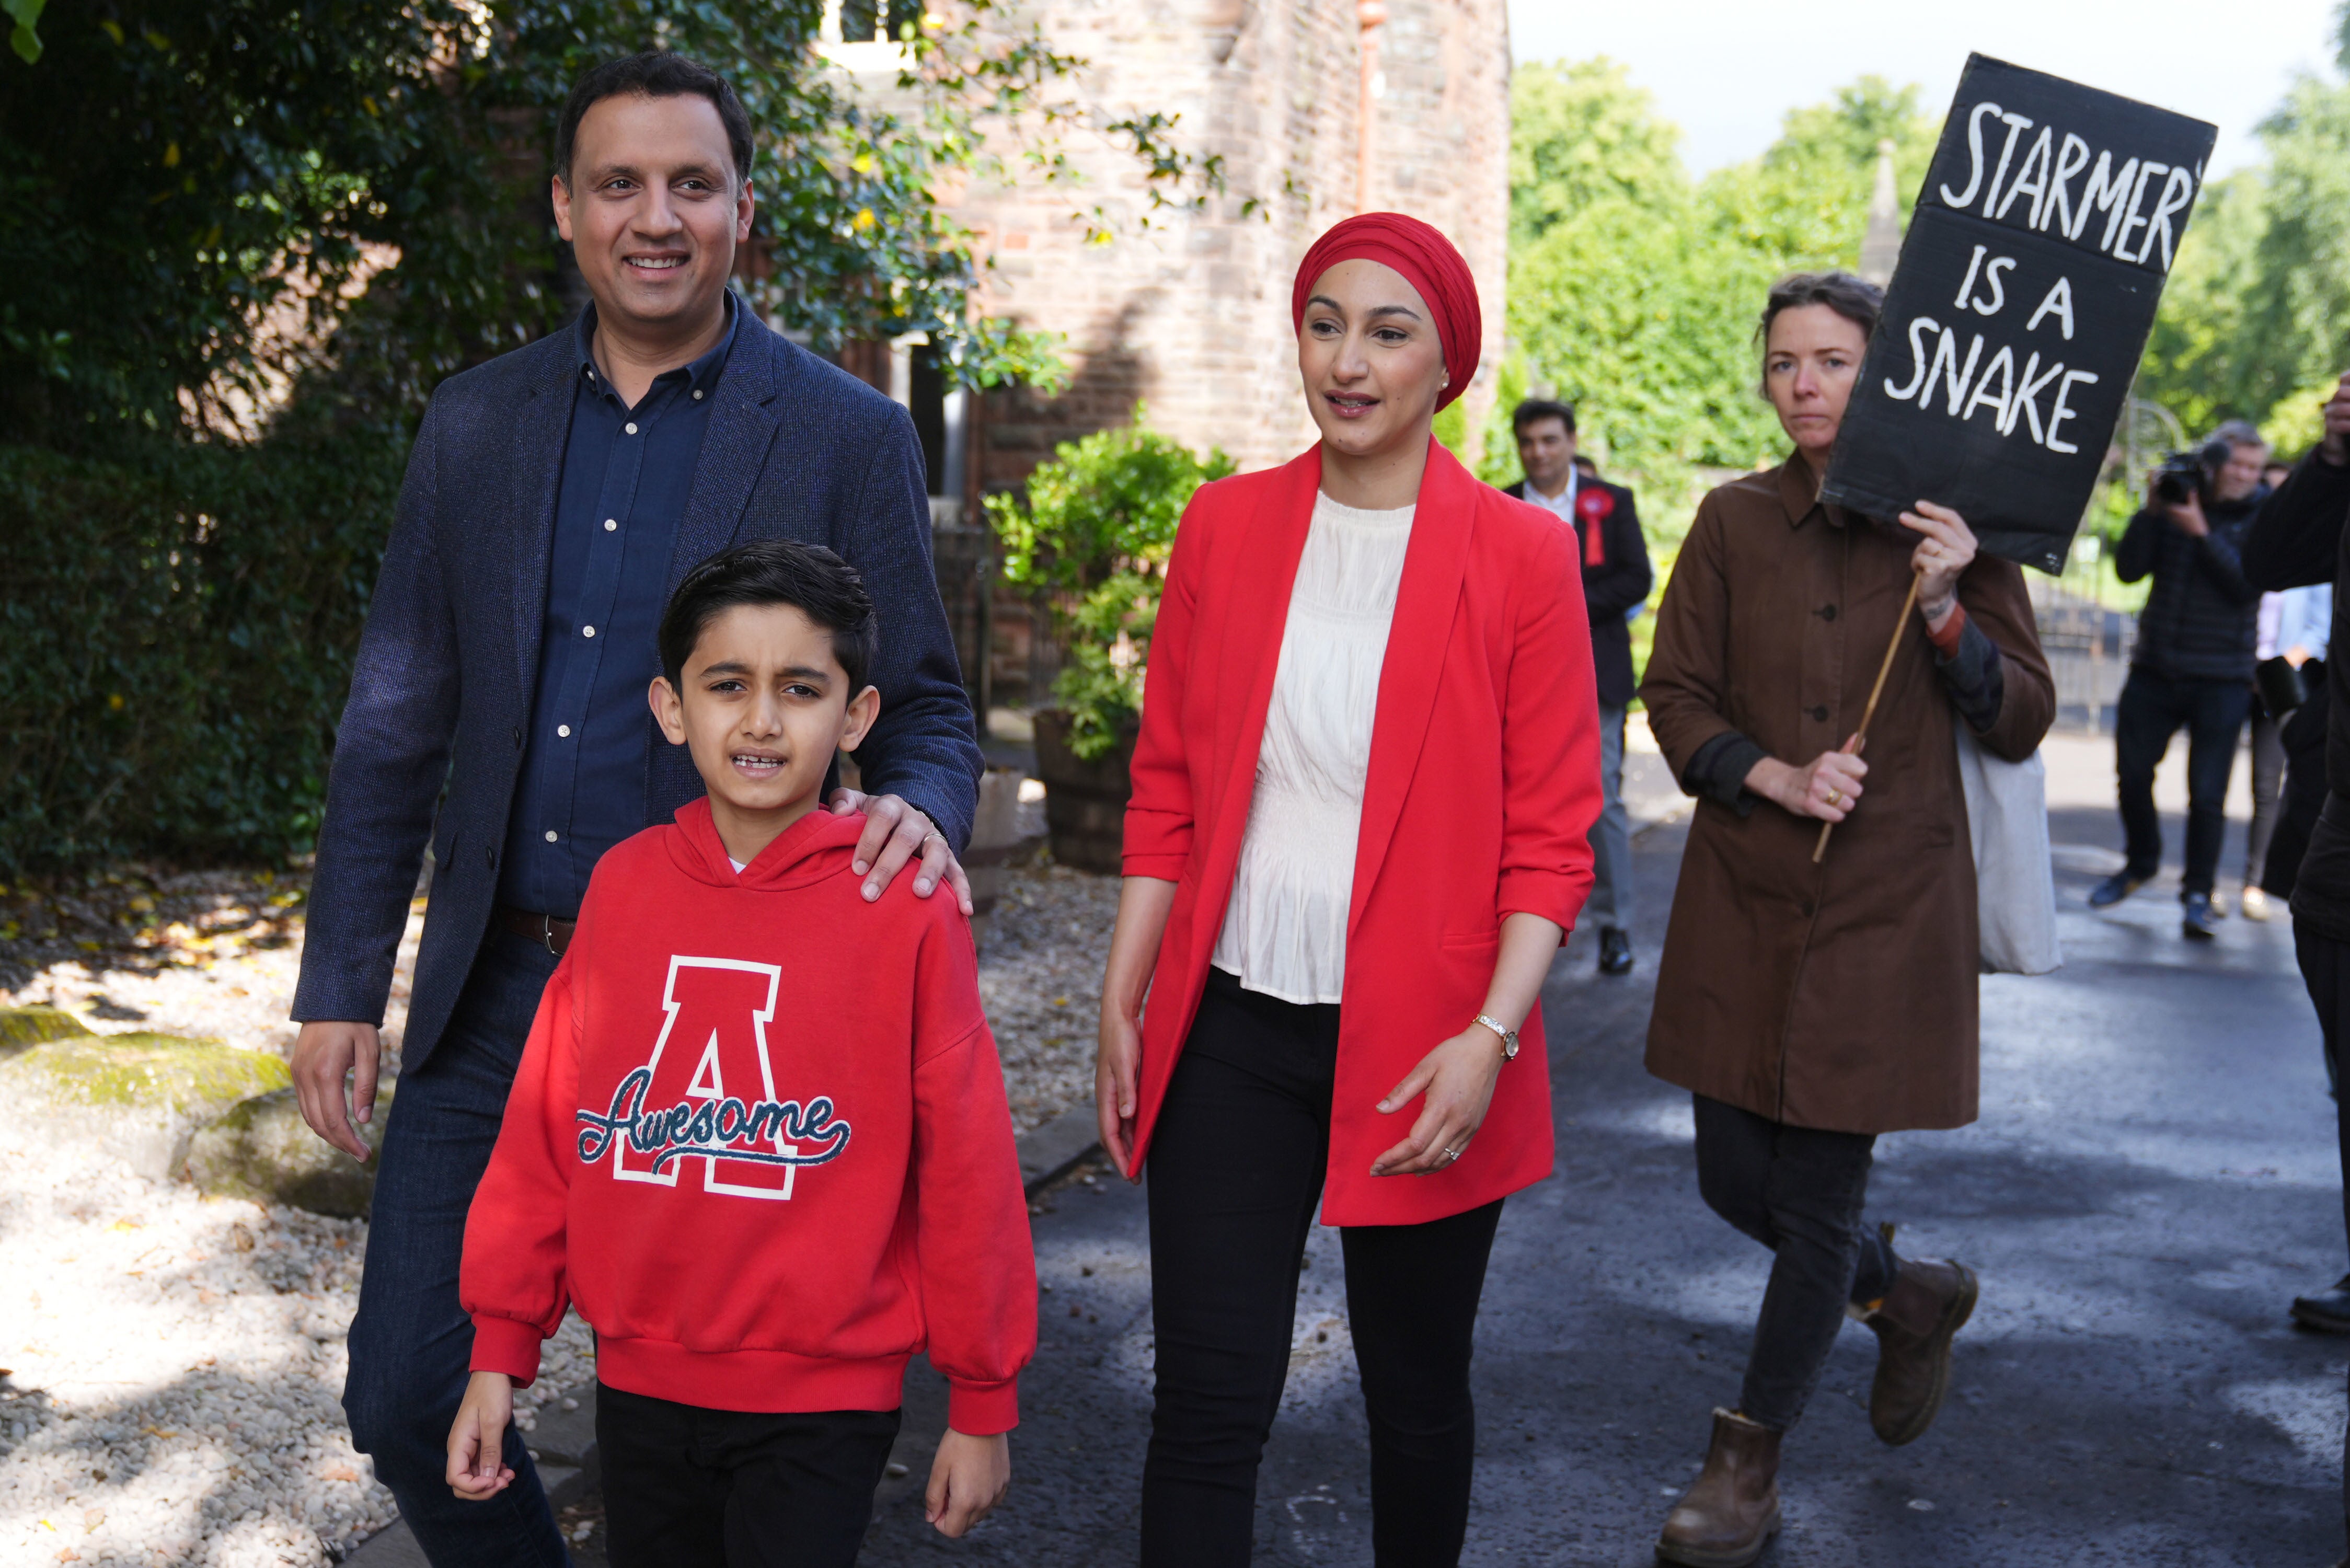 Scottish Labour leader Anas Sarwar, his wife Furheen and their son Aliyan were followed by a protester as they attended Pollokshields Burgh Halls in Glasgow to vote (Andrew Milligan/PA)